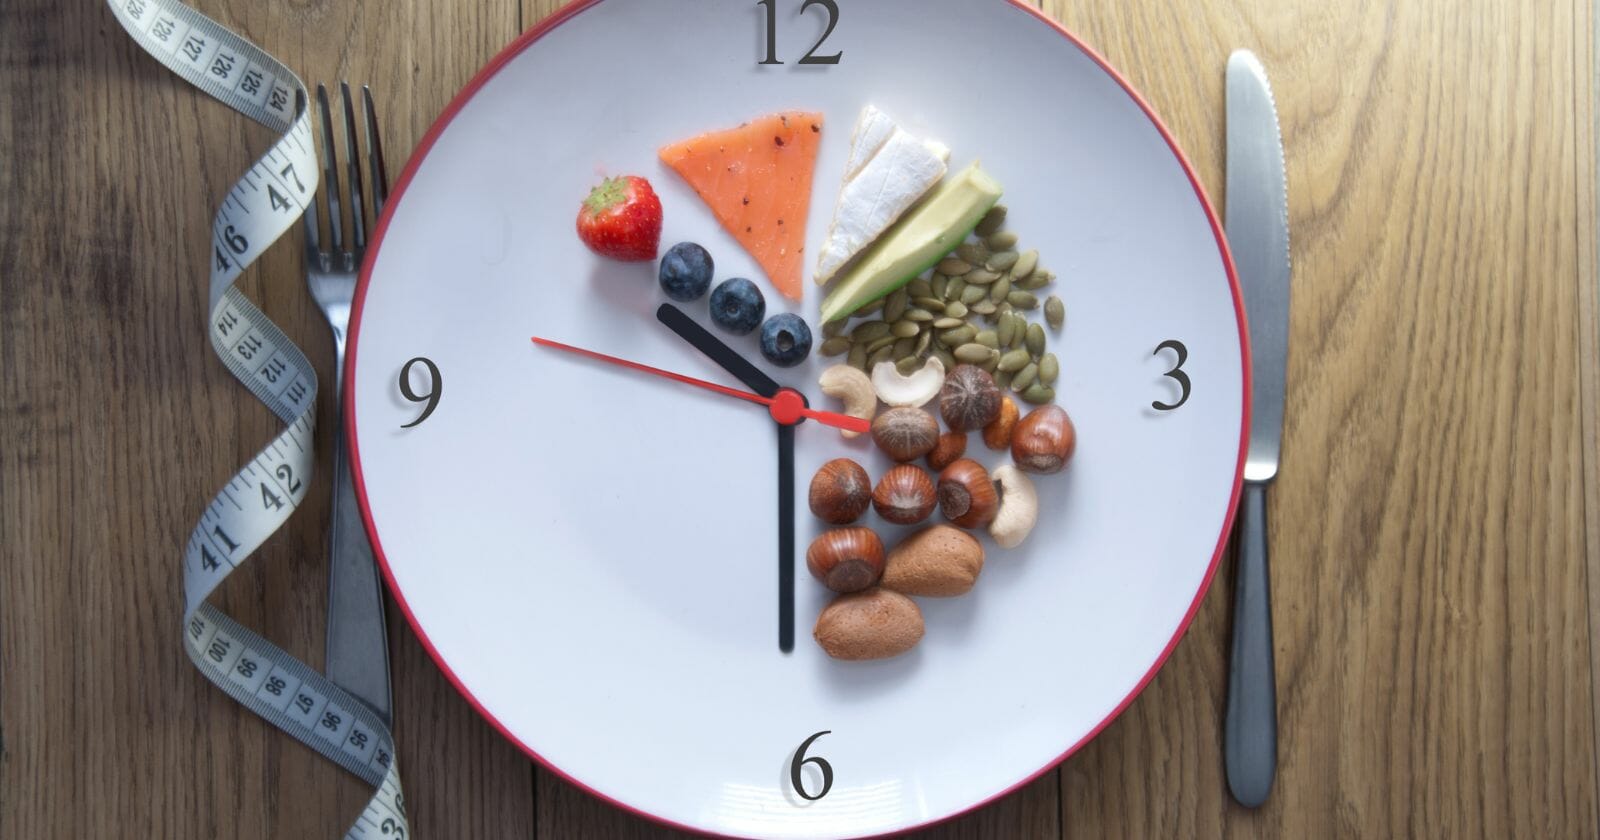 Plate with a clock time on it to indicate fasting times